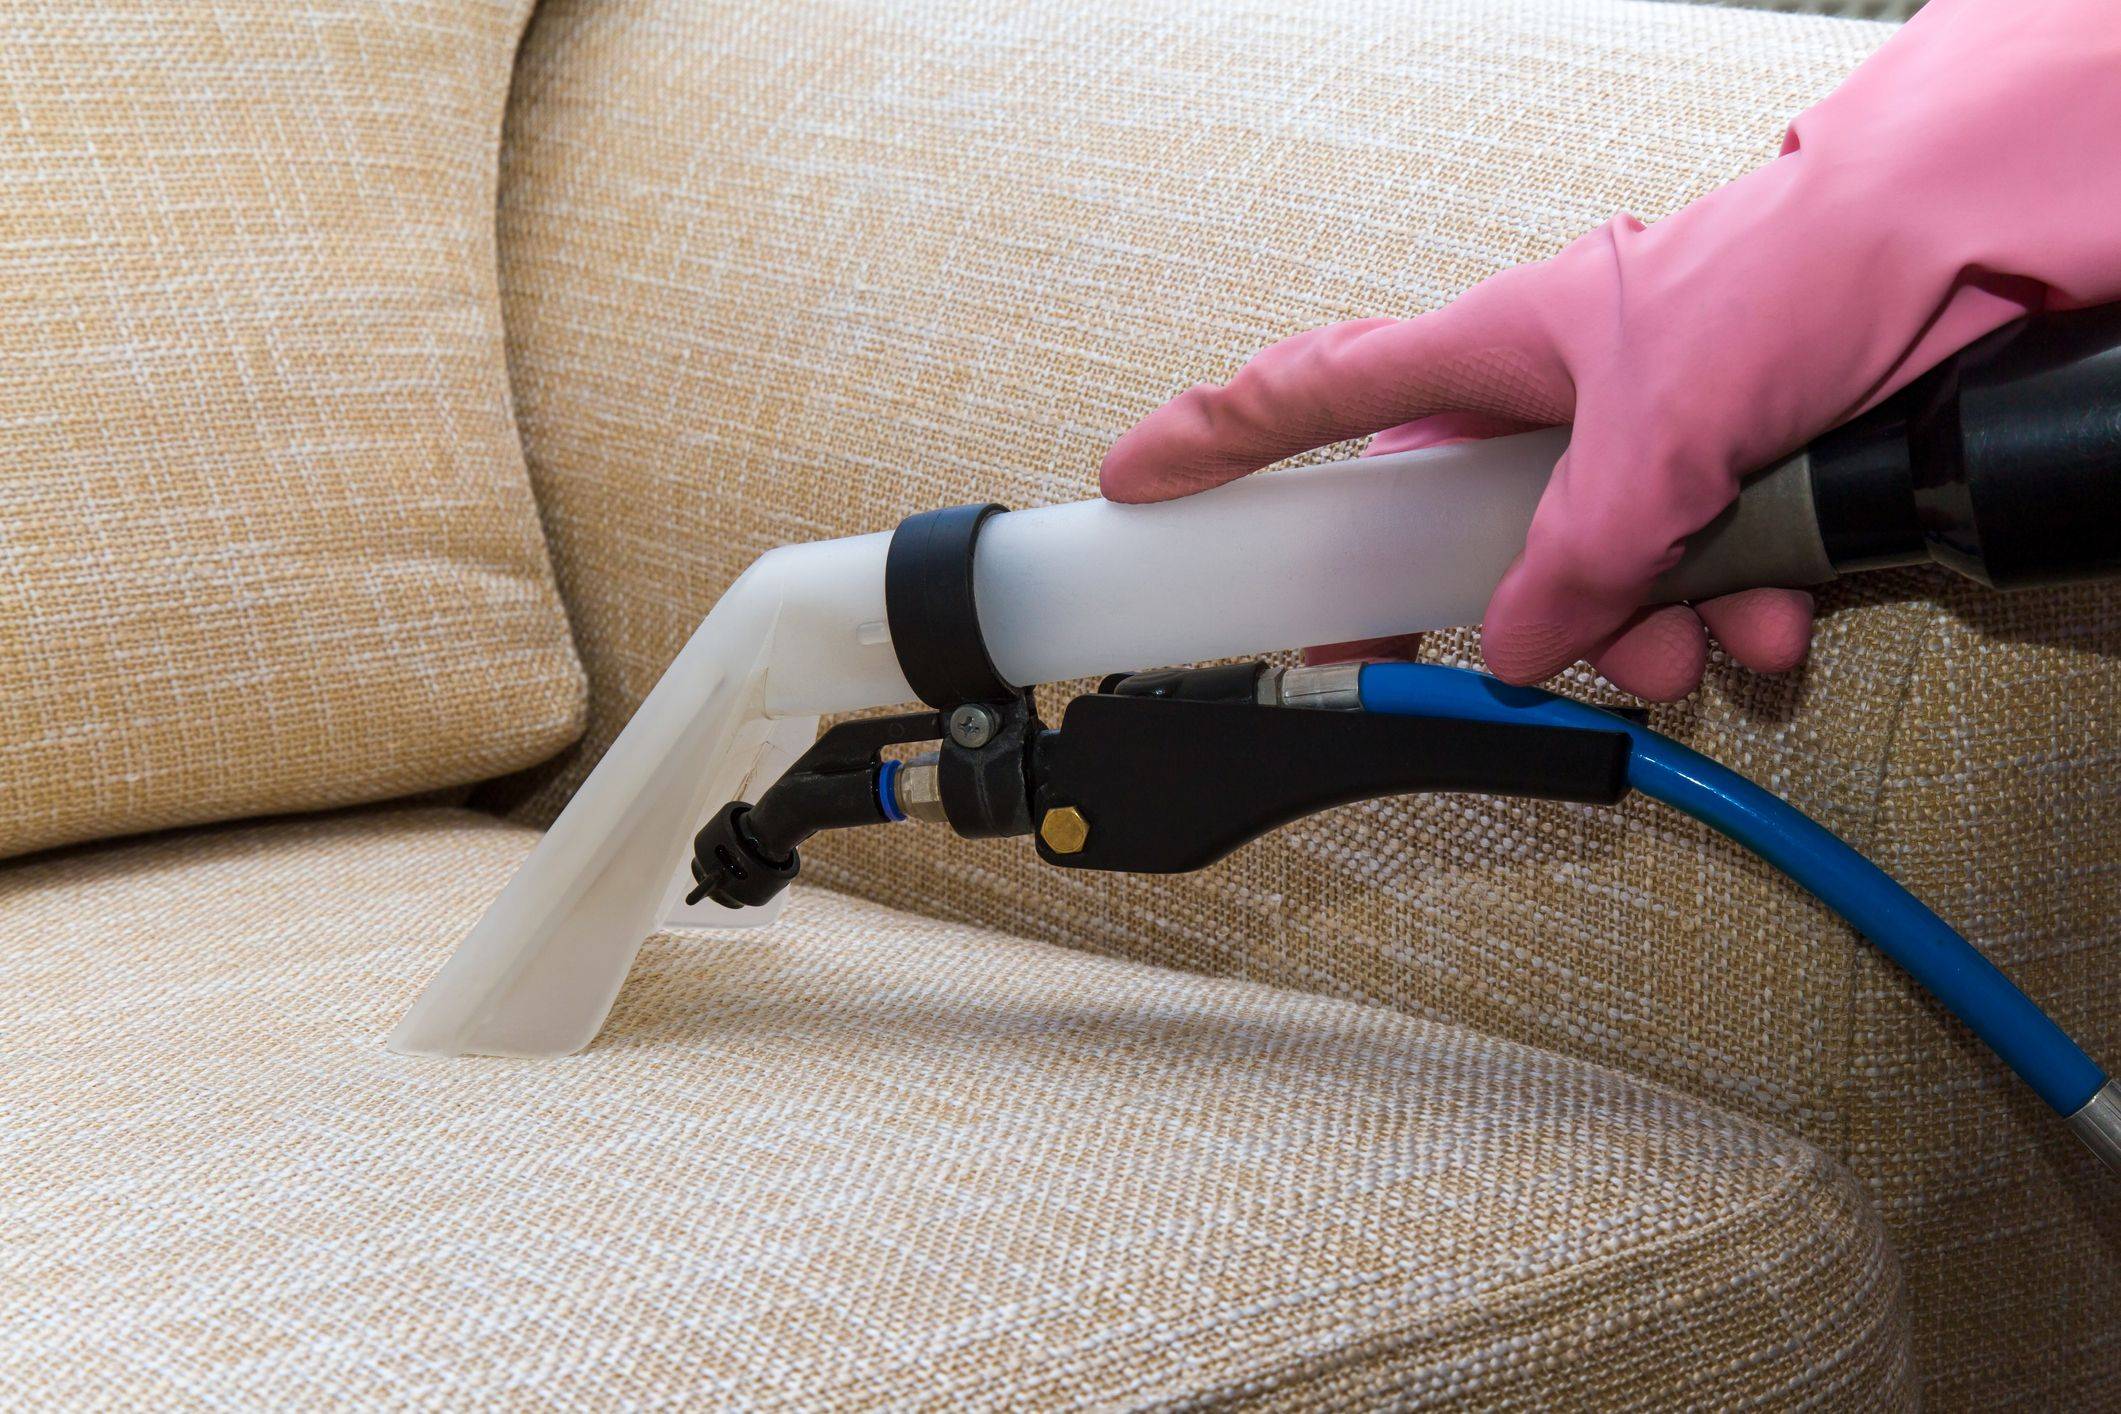 How to use an upholstery tool for cleaning furniture - Magic Wand